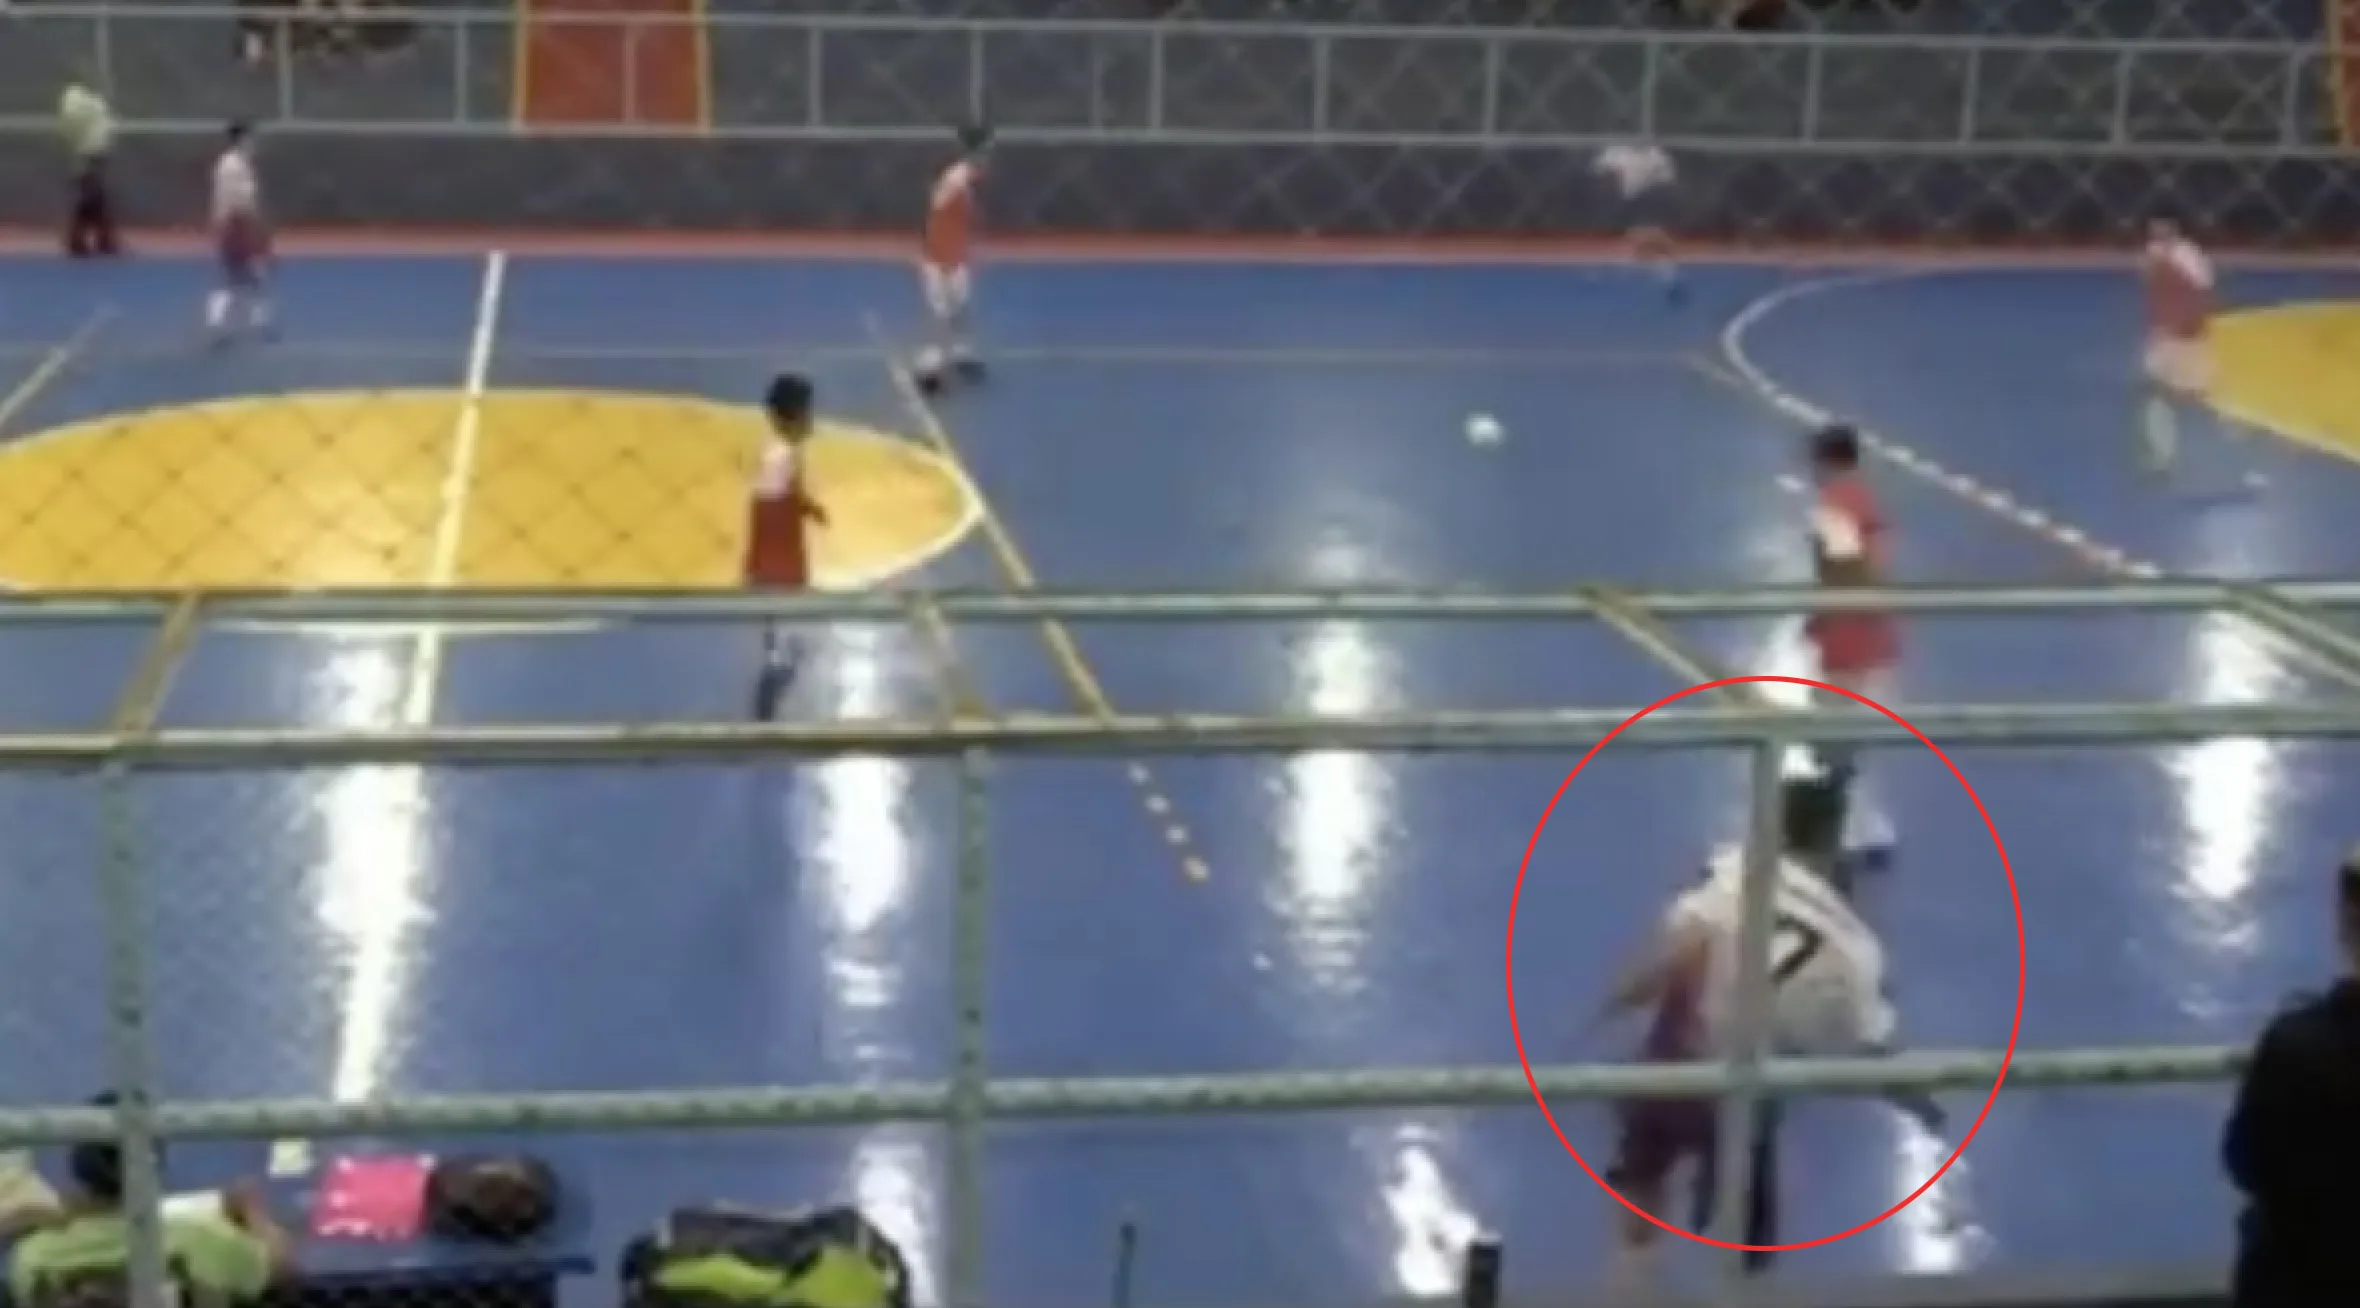 Video grab showing Guilherme Carvalho Castaman at his futsal match when he mysteriously drops dead.